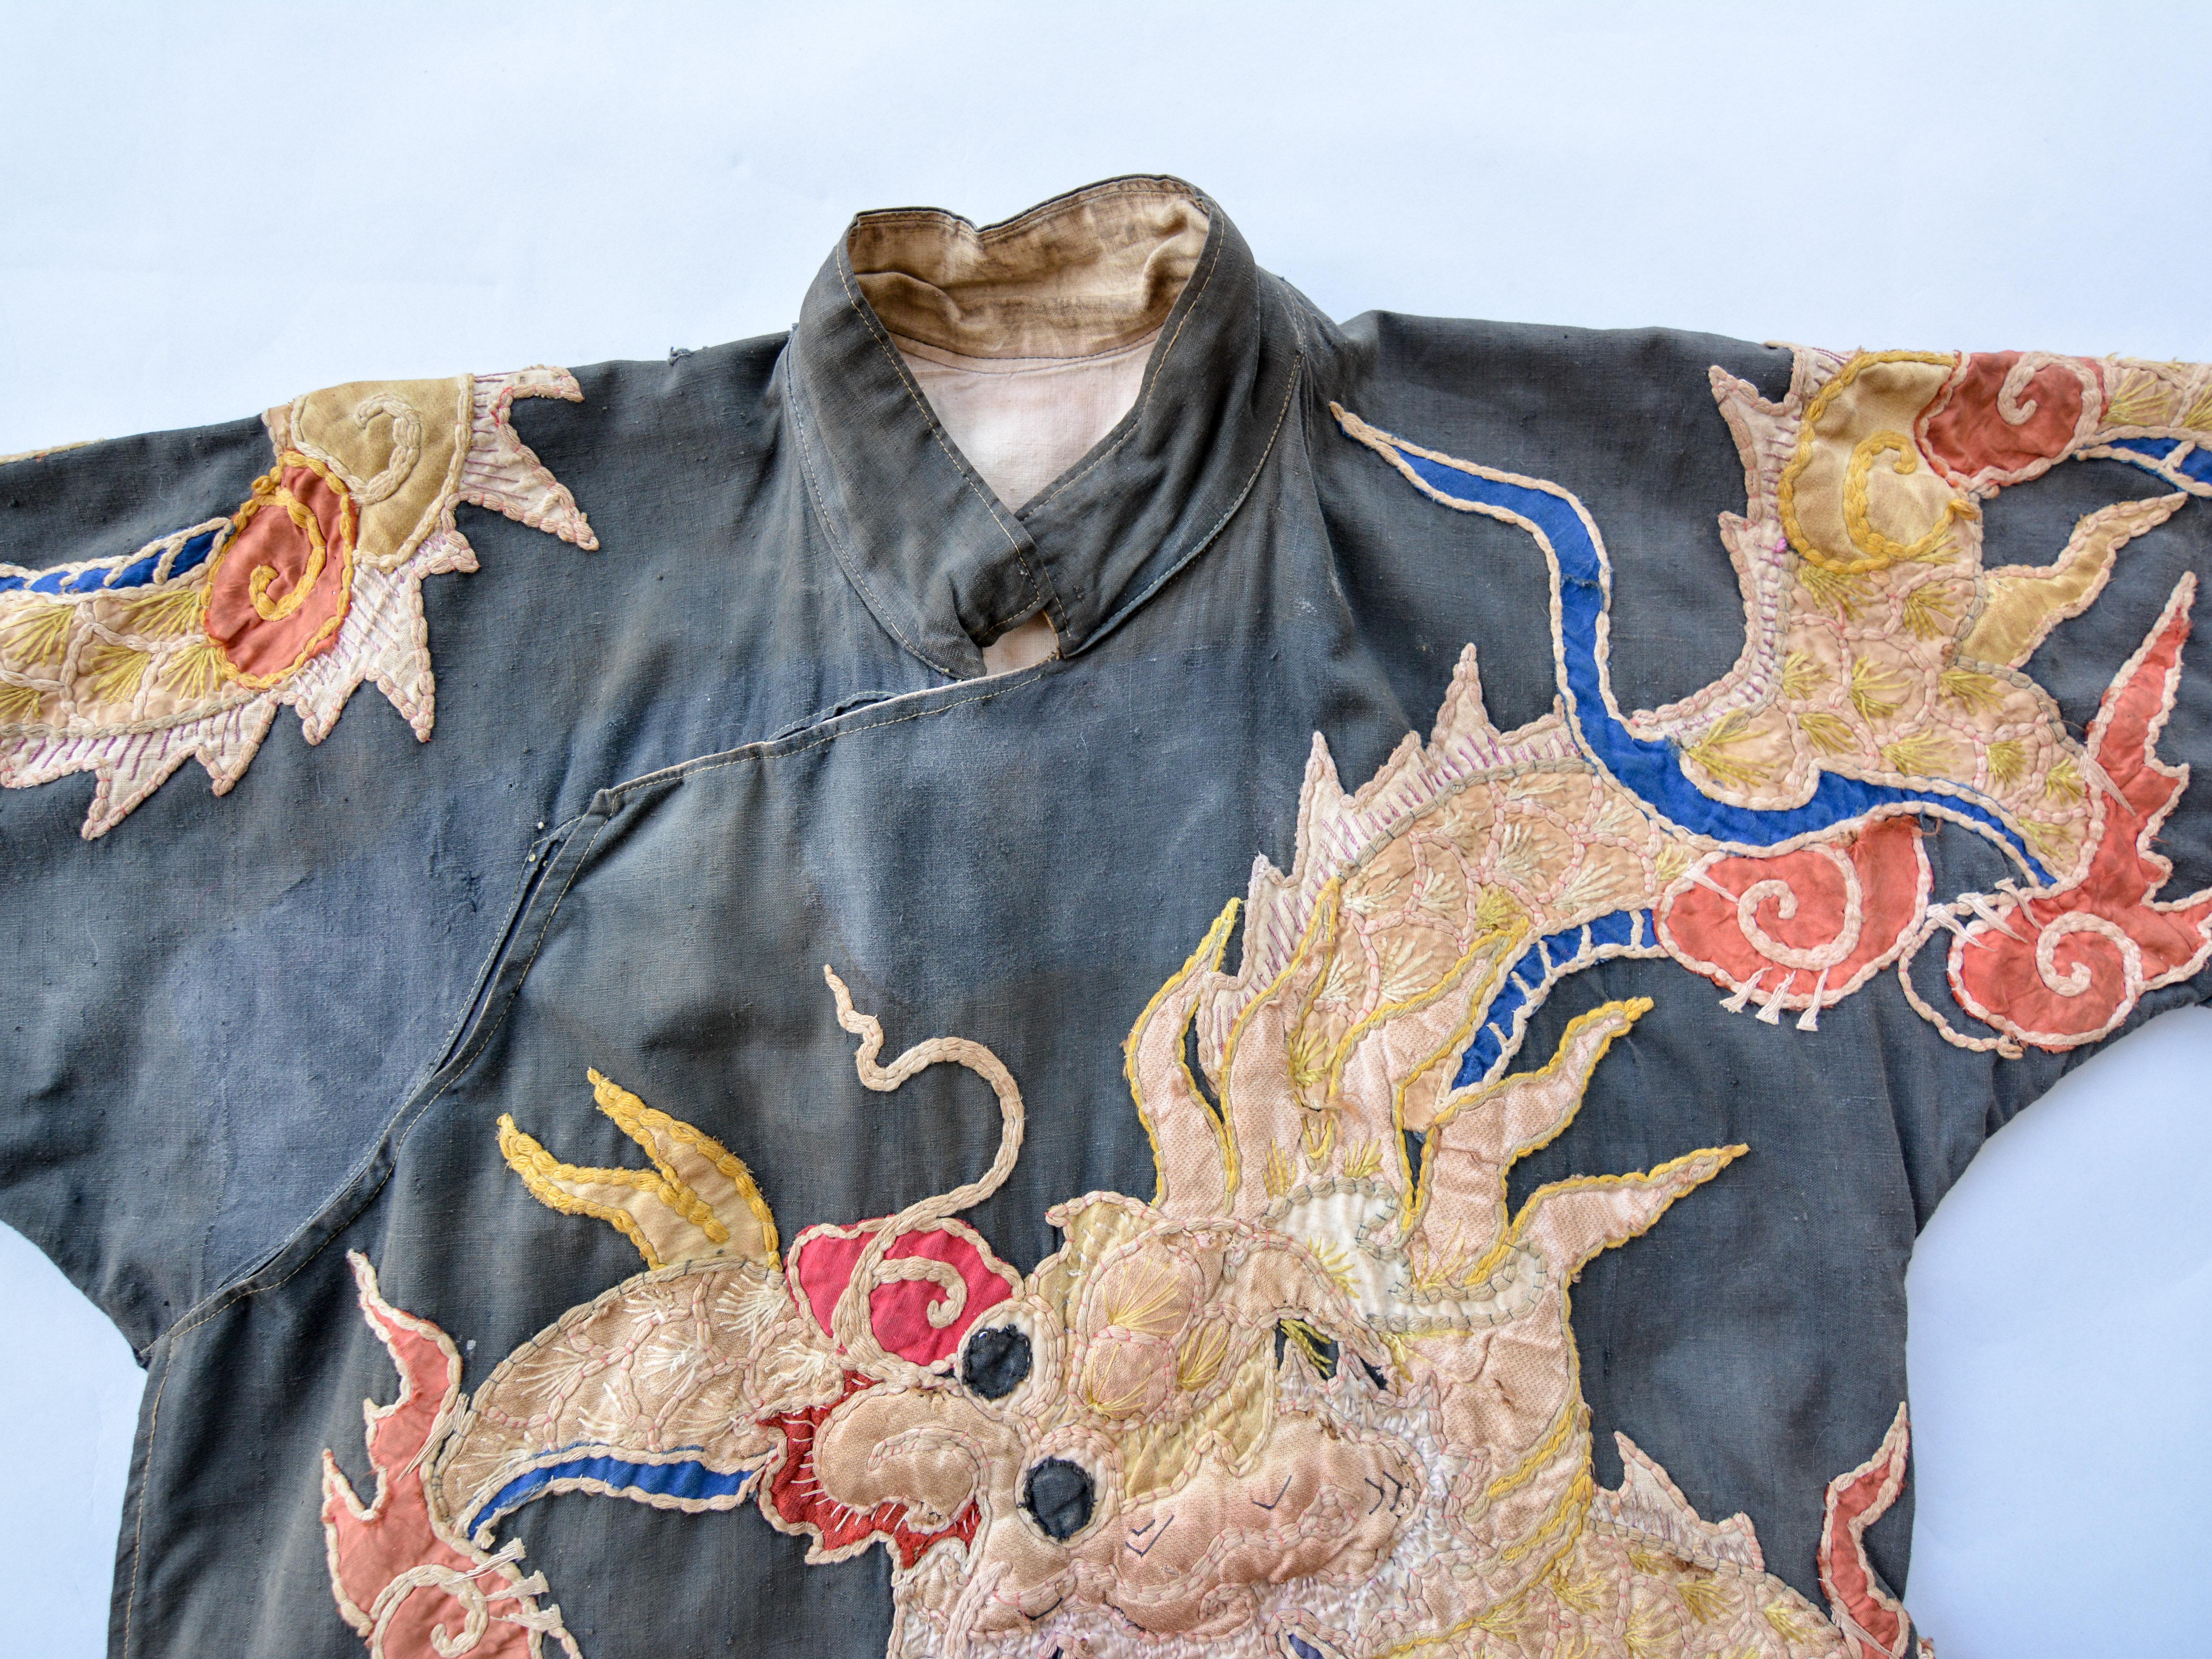 Priest or Shaman Coat. Southern China or Vietnam. Early to mid-20th century.
This visually impactful coat depicts as its central motif a dragon, on front and back, and utilizes embroidery and applique work.
The jacket is in fair condition. This is